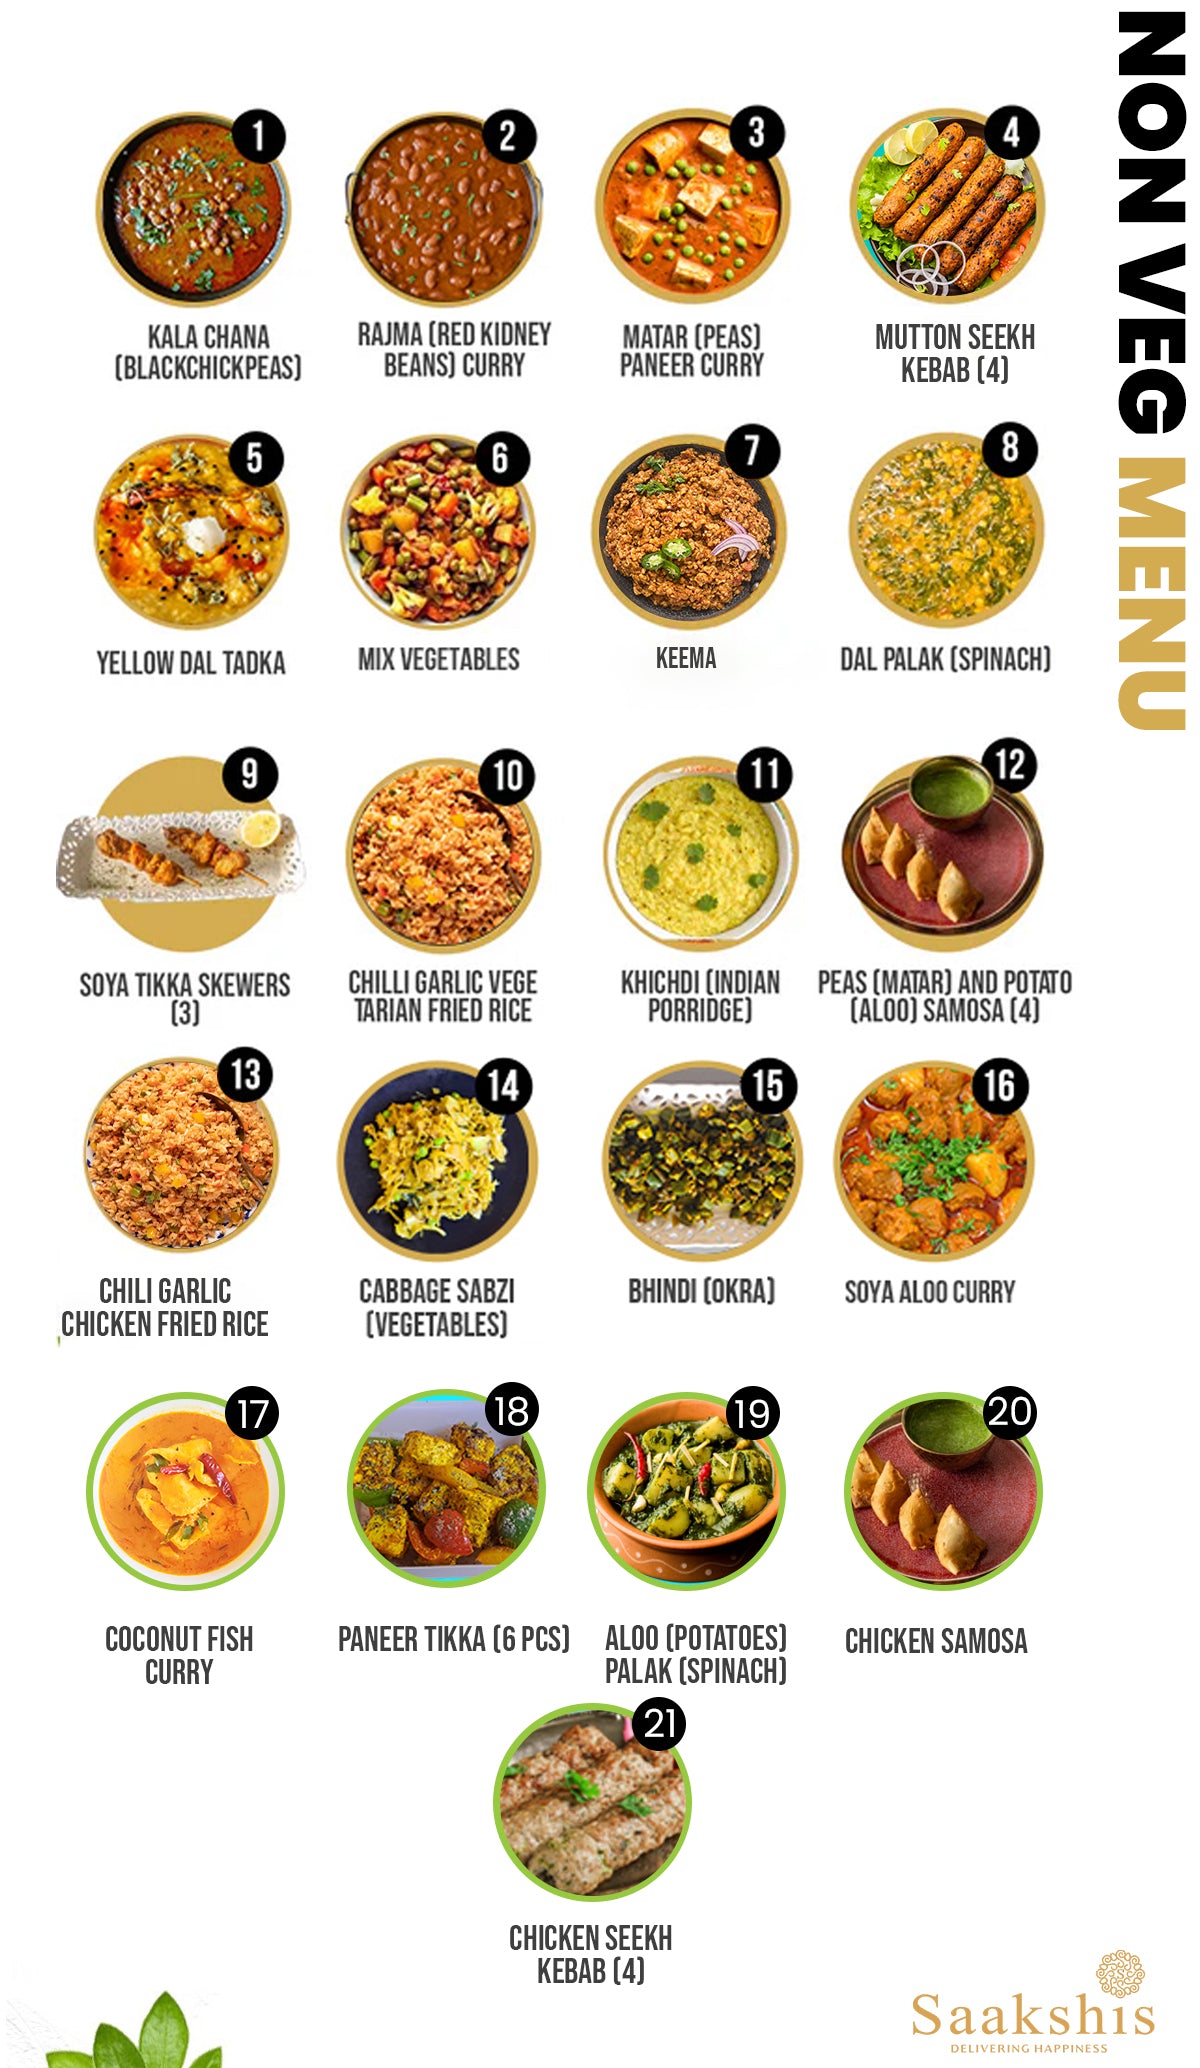 NON VEG MENU MIX & MATCH 5 WEEKLY MEALS SUBSCRIPTION EXCLUDED